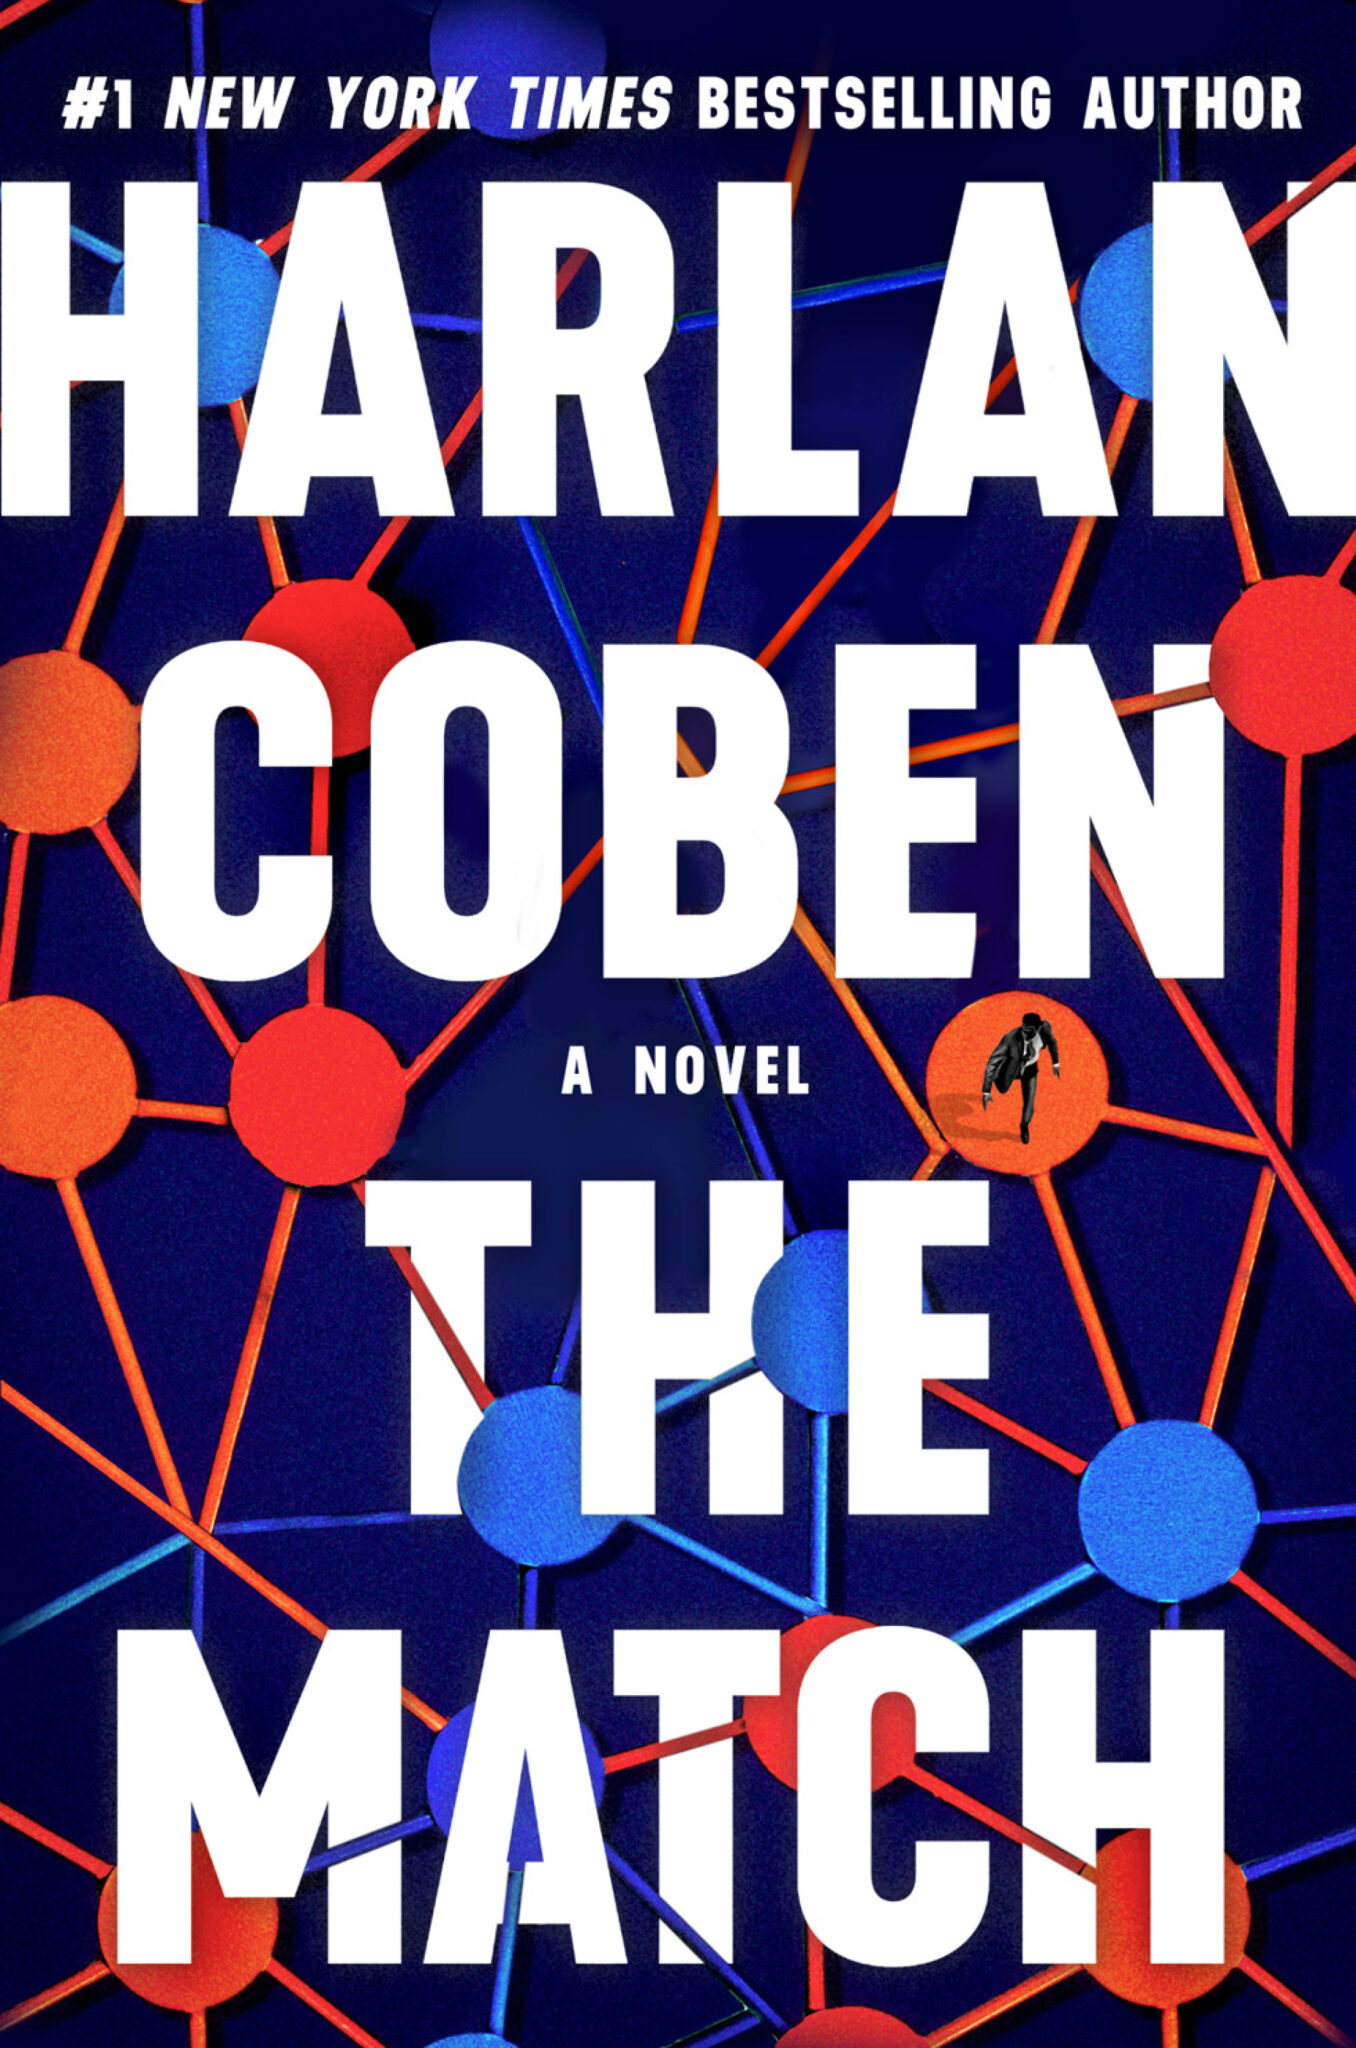 Bestselling author Harlan Coben talks about his newest thriller novel